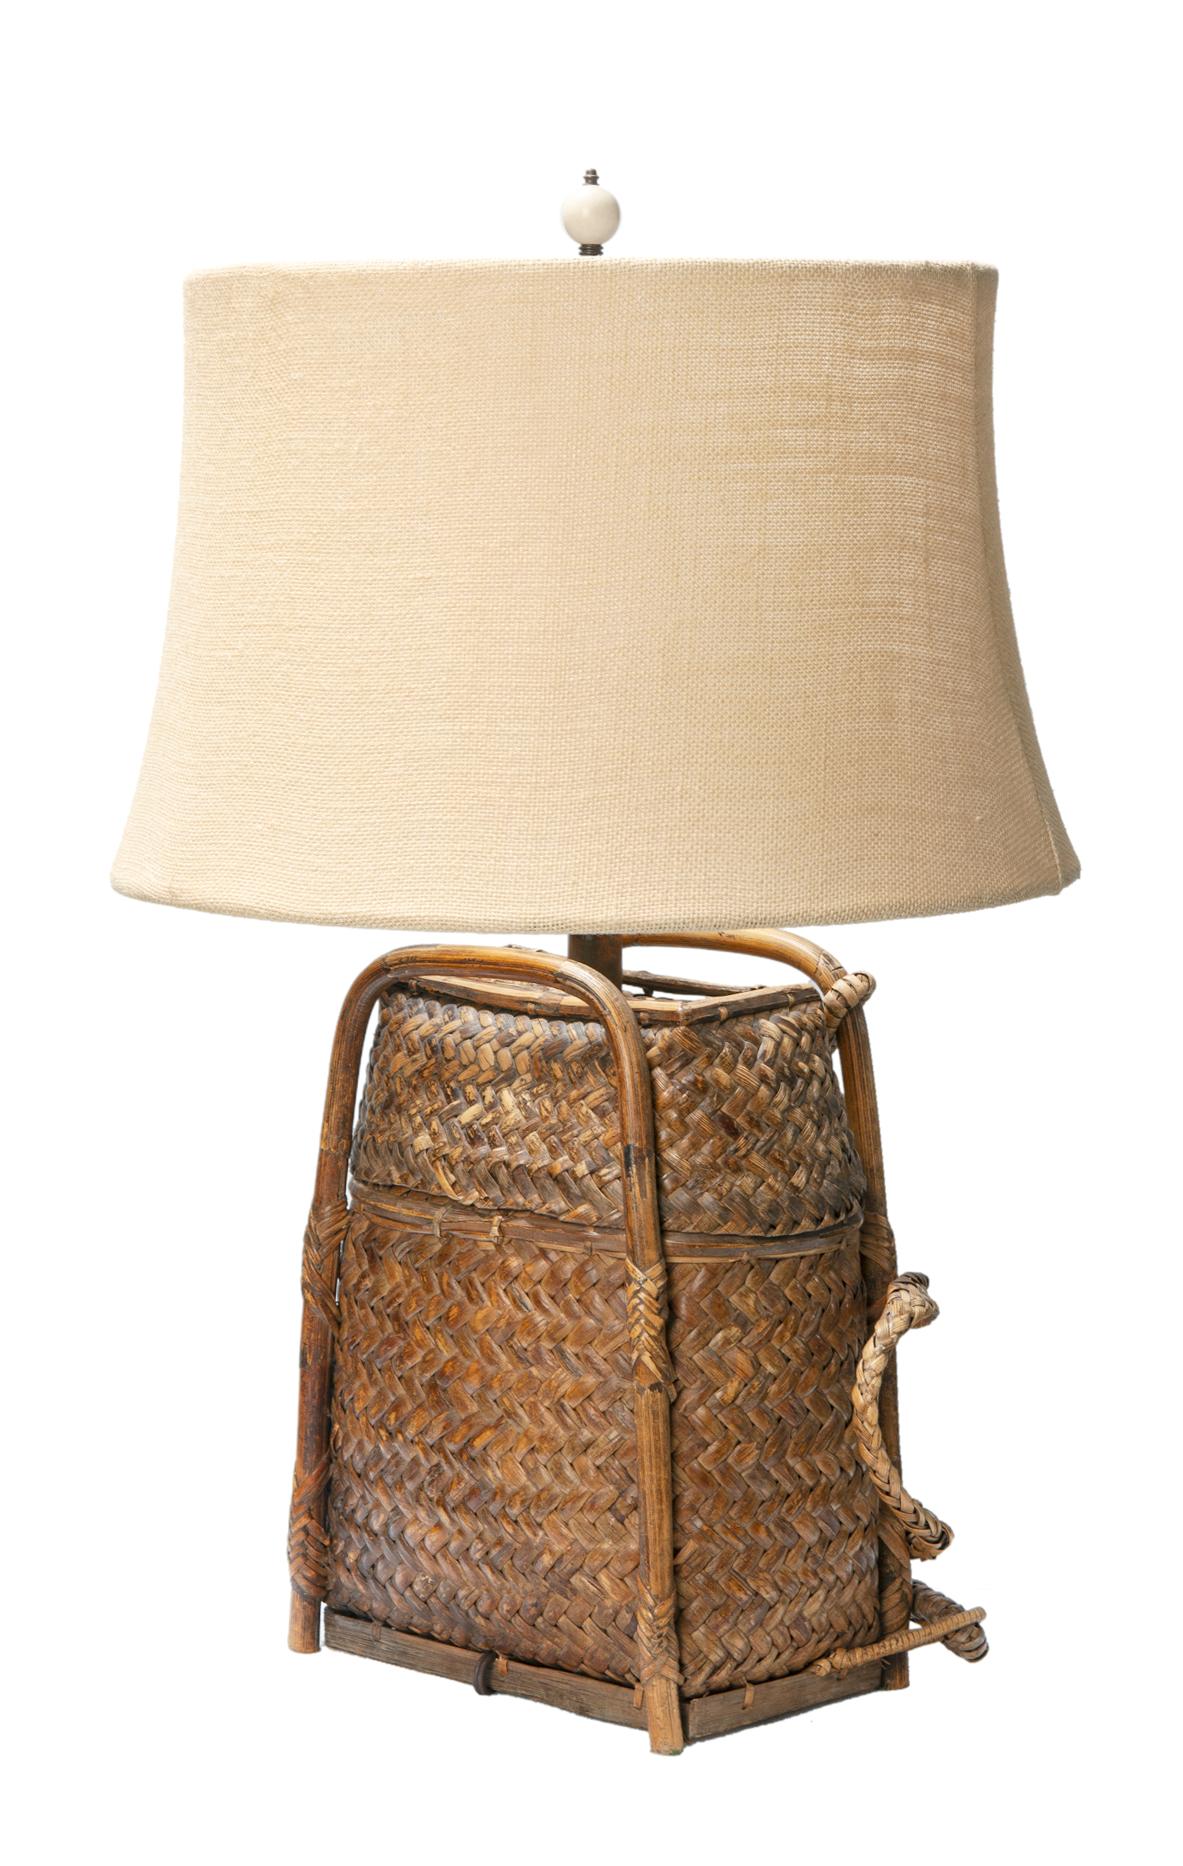 Custom made table lamp created from a vintage Chinese bamboo backpack.
Finial & new burlap shade are included.